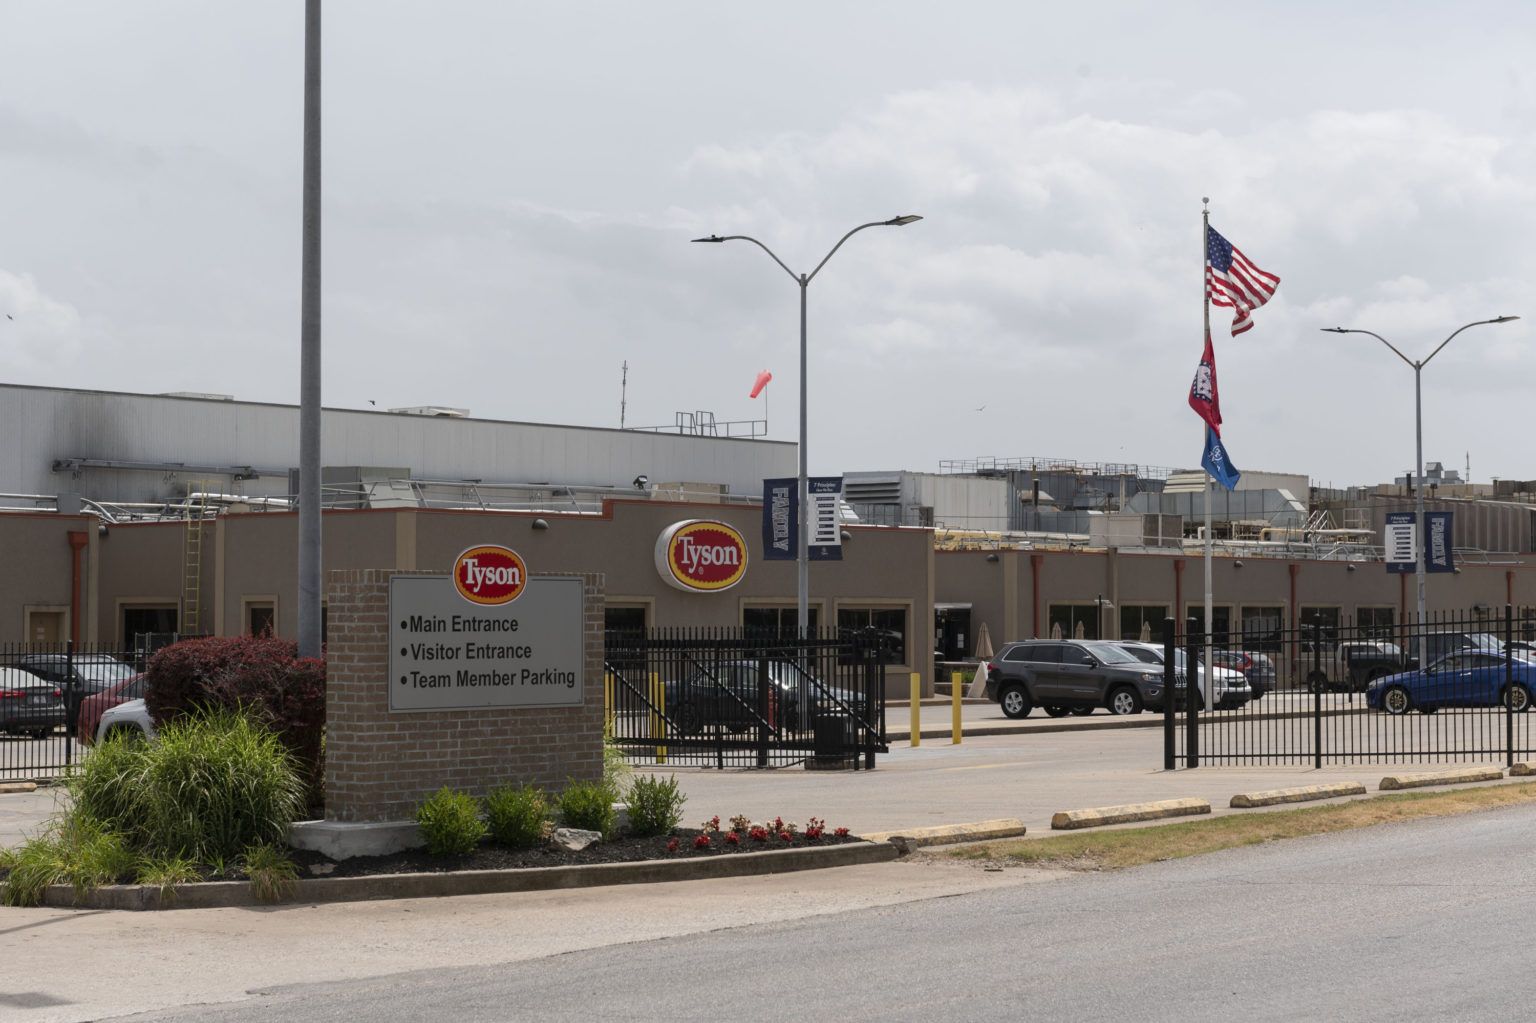 A Tyson plant on West Olrich Street in Rogers, Arkansas on June 28, 2020. Image by Spencer Tirey, For The Midwest Center for Investigative Reporting. United States, 2020.
